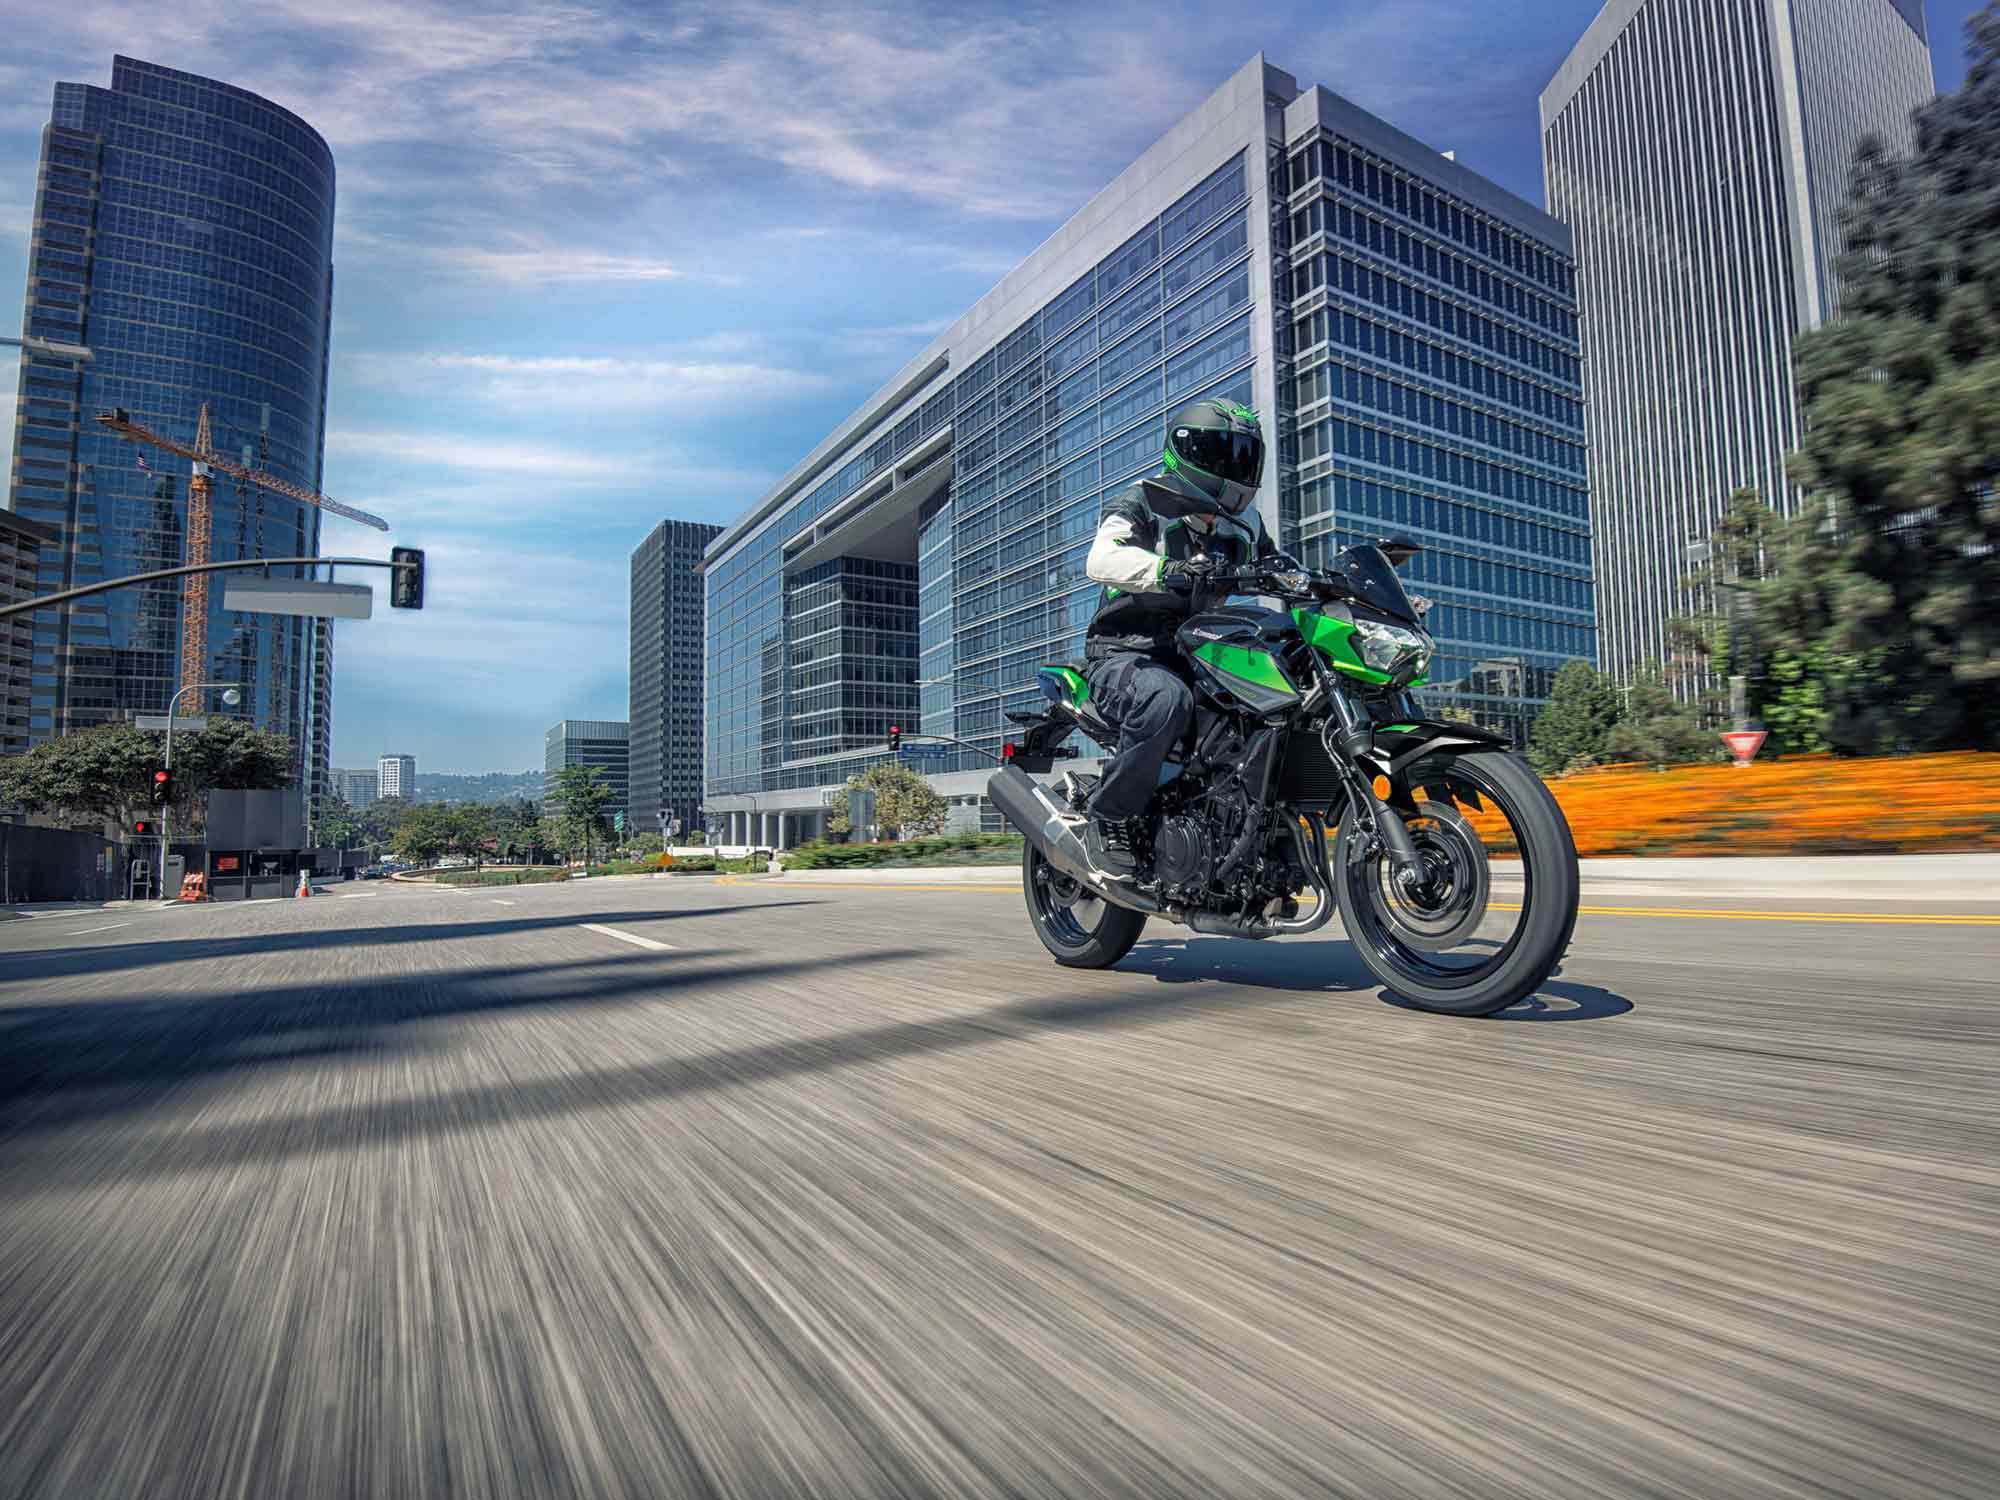 At $5,199, the Z400 is priced competitively for the beginner market.